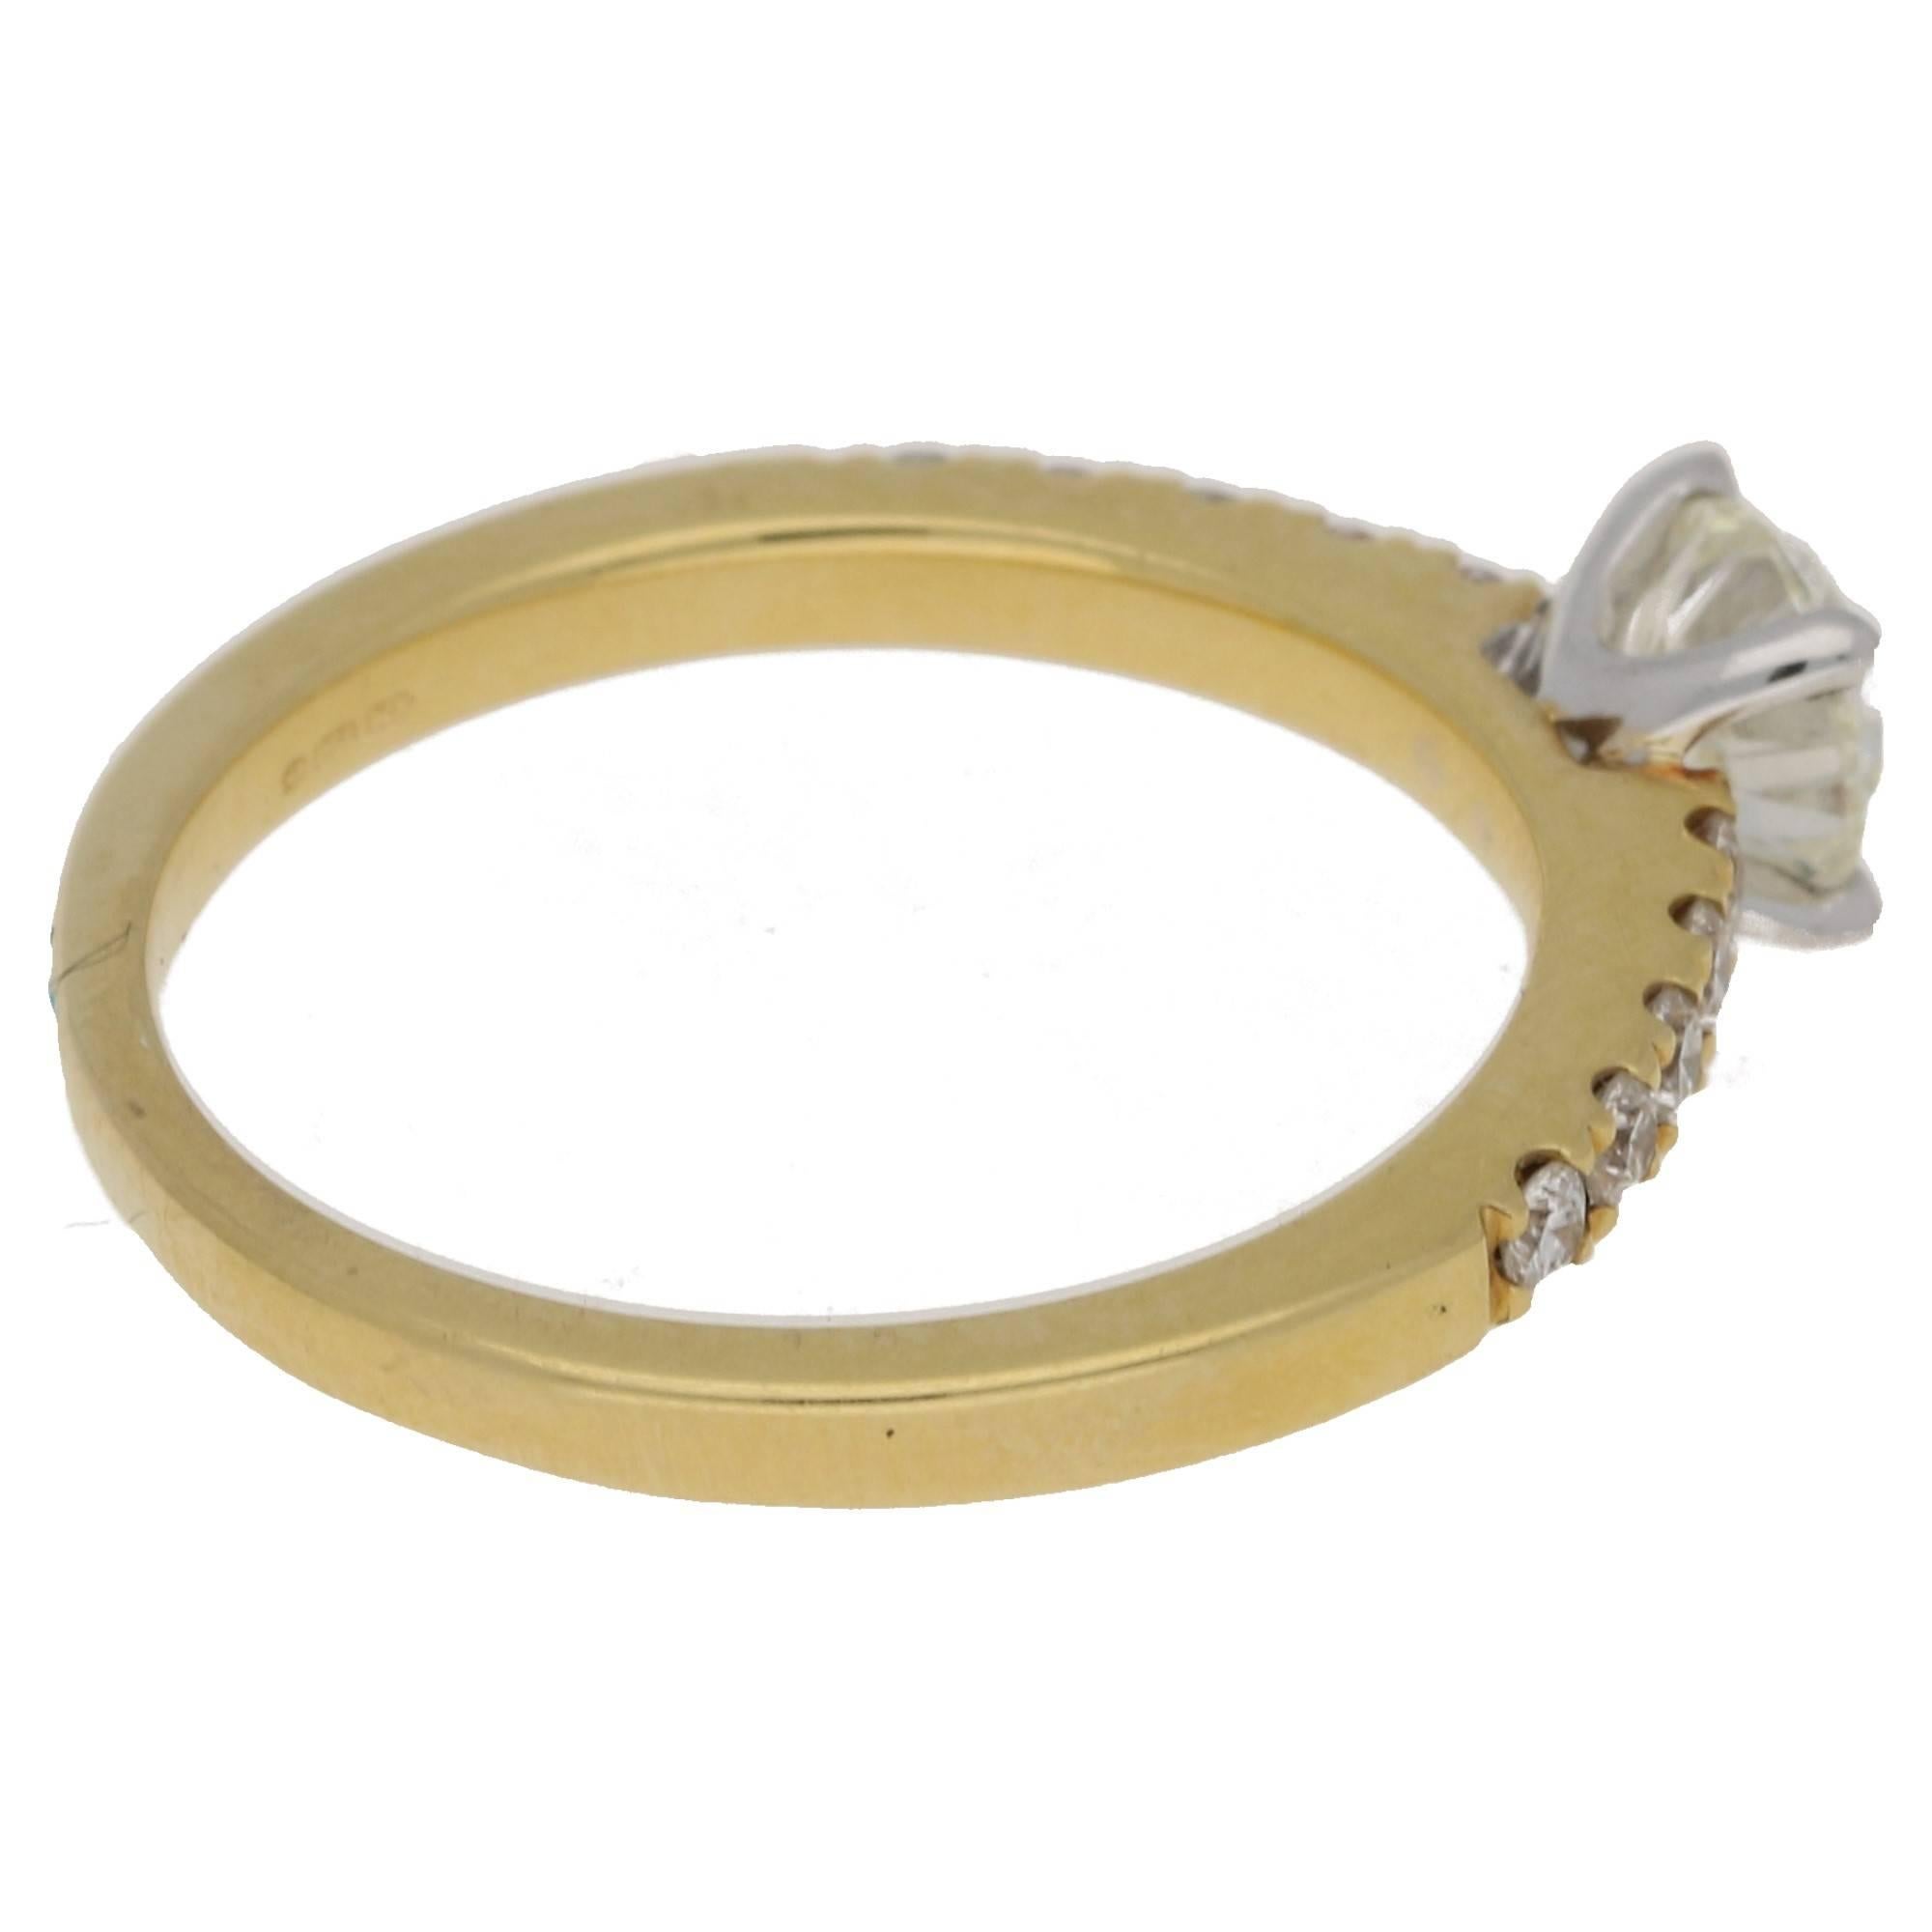 A contemporary diamond solitaire ring set in 18ct yellow and white gold. The centrally set round brilliant cut diamond is four claw set in 18ct white gold, and shouldered with ten brilliant cut diamonds grain set in 18ct yellow gold. Estimated